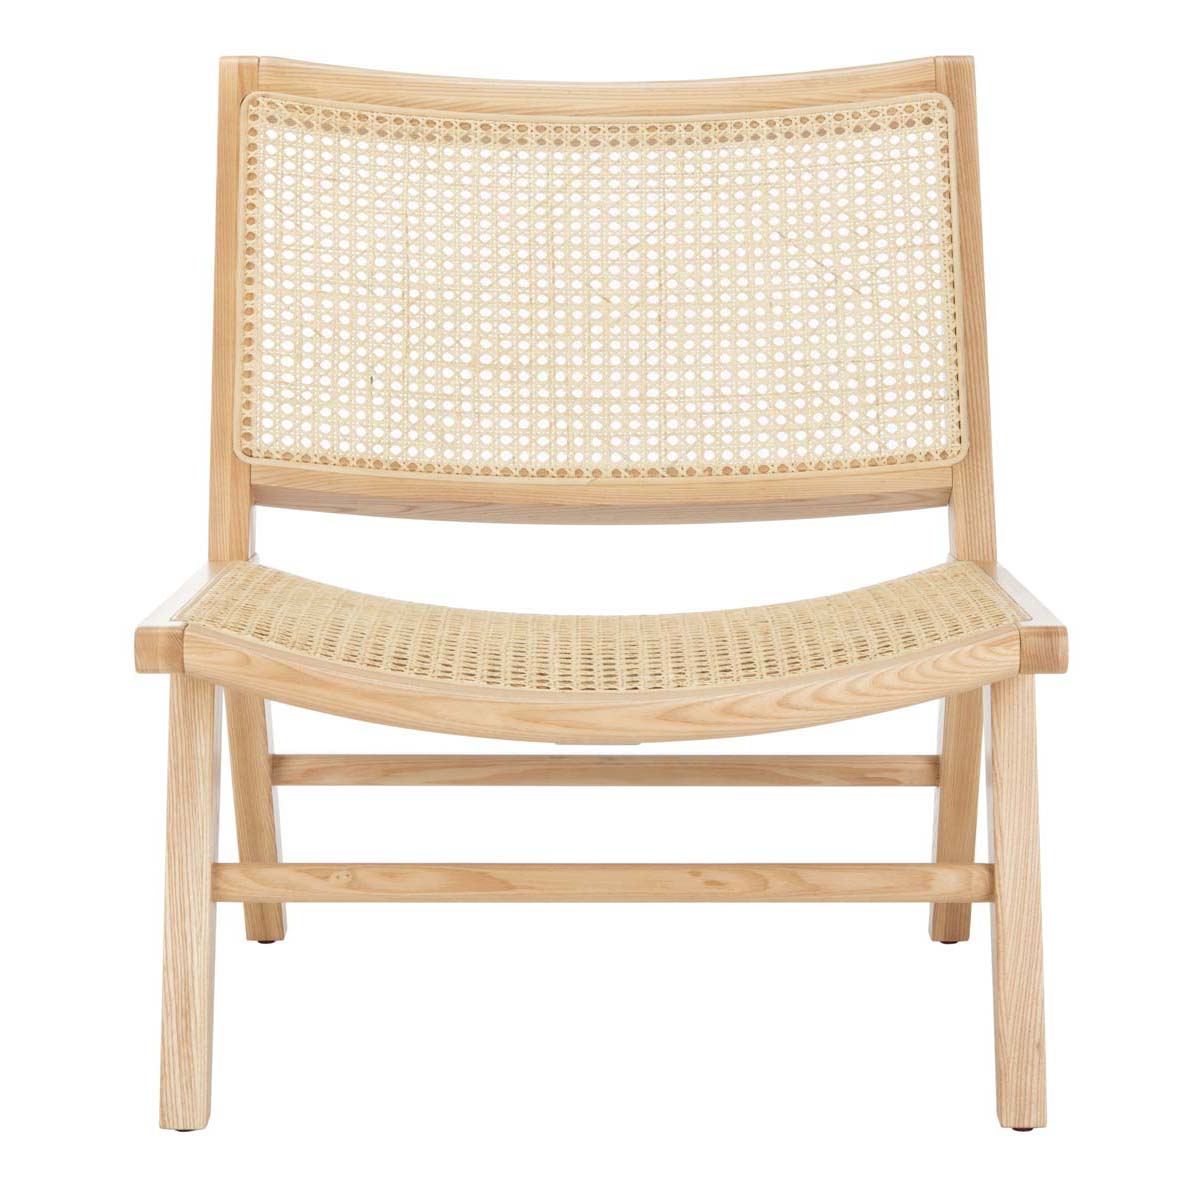 Safavieh Couture Auckland Rattan Accent Chair